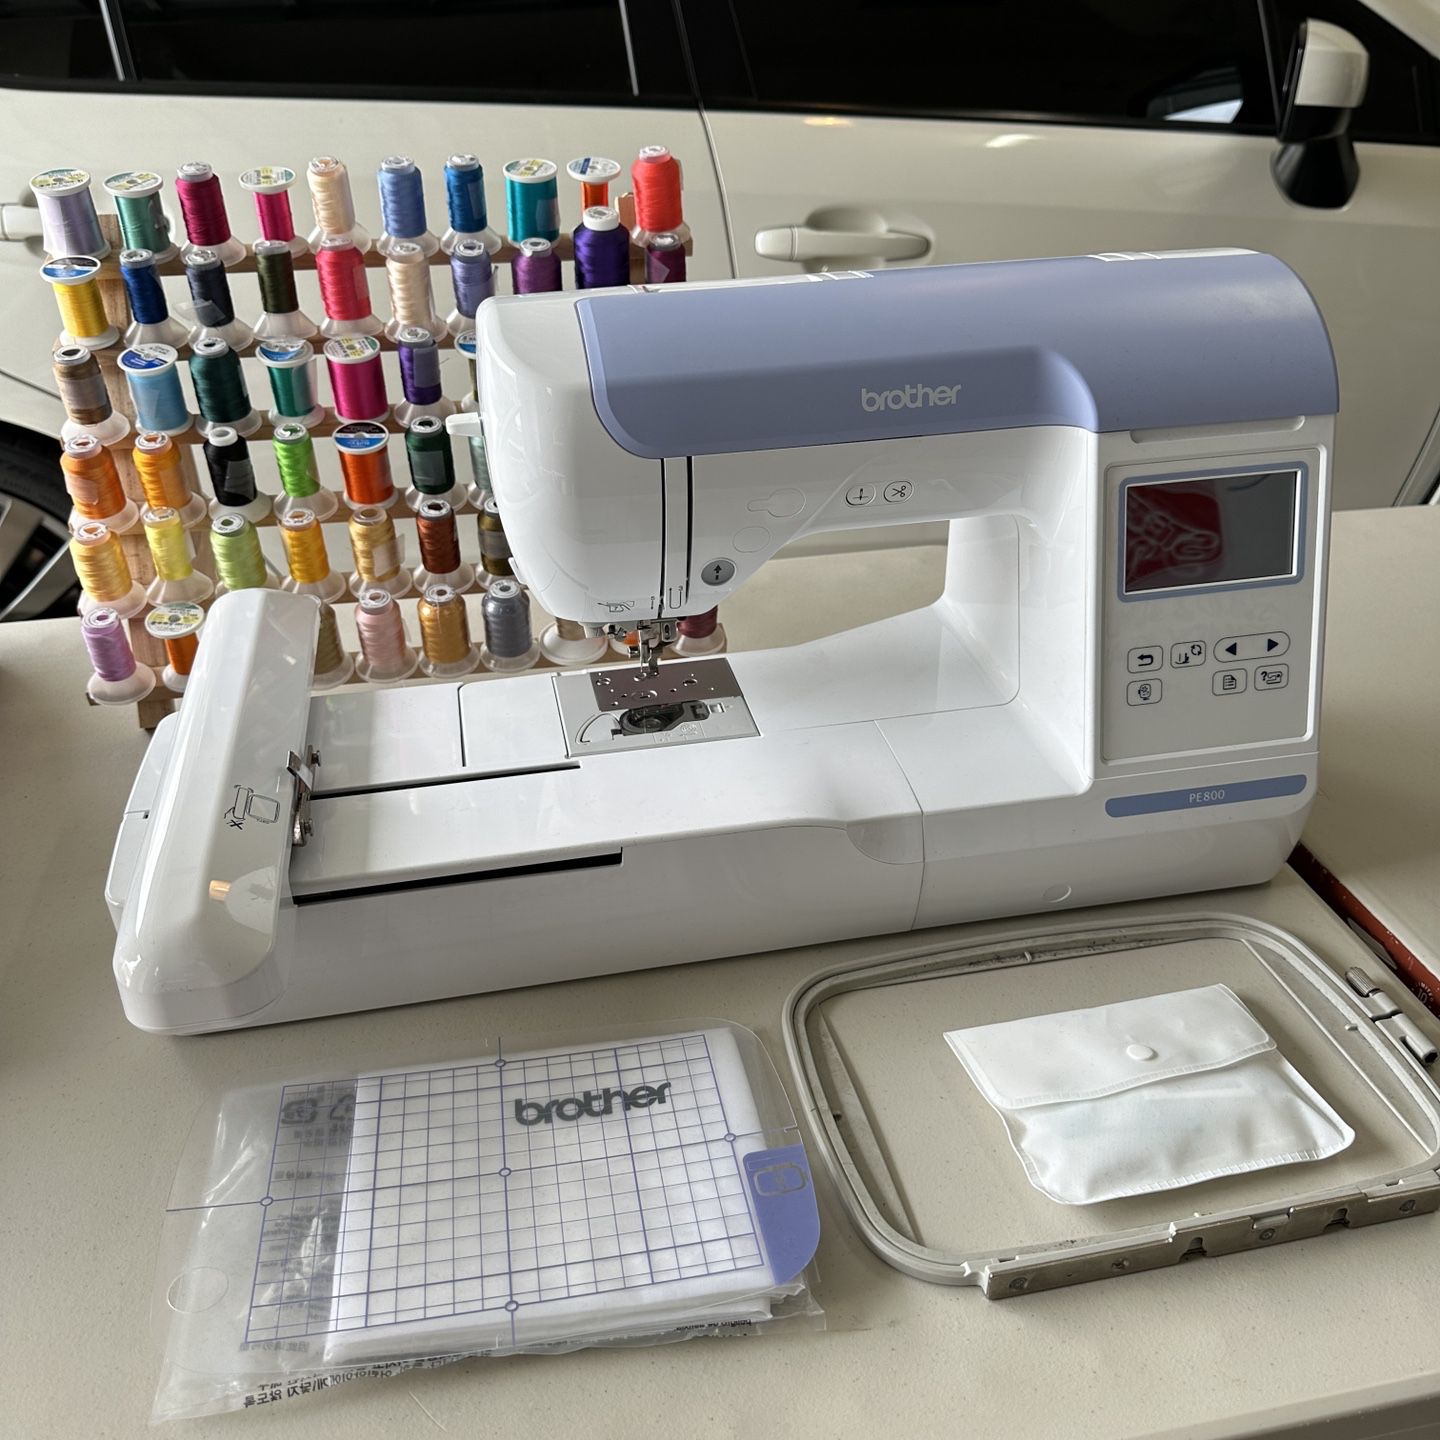 Brother PE800 5 x 7 Embroidery Machine w/ Embroidery Bundle